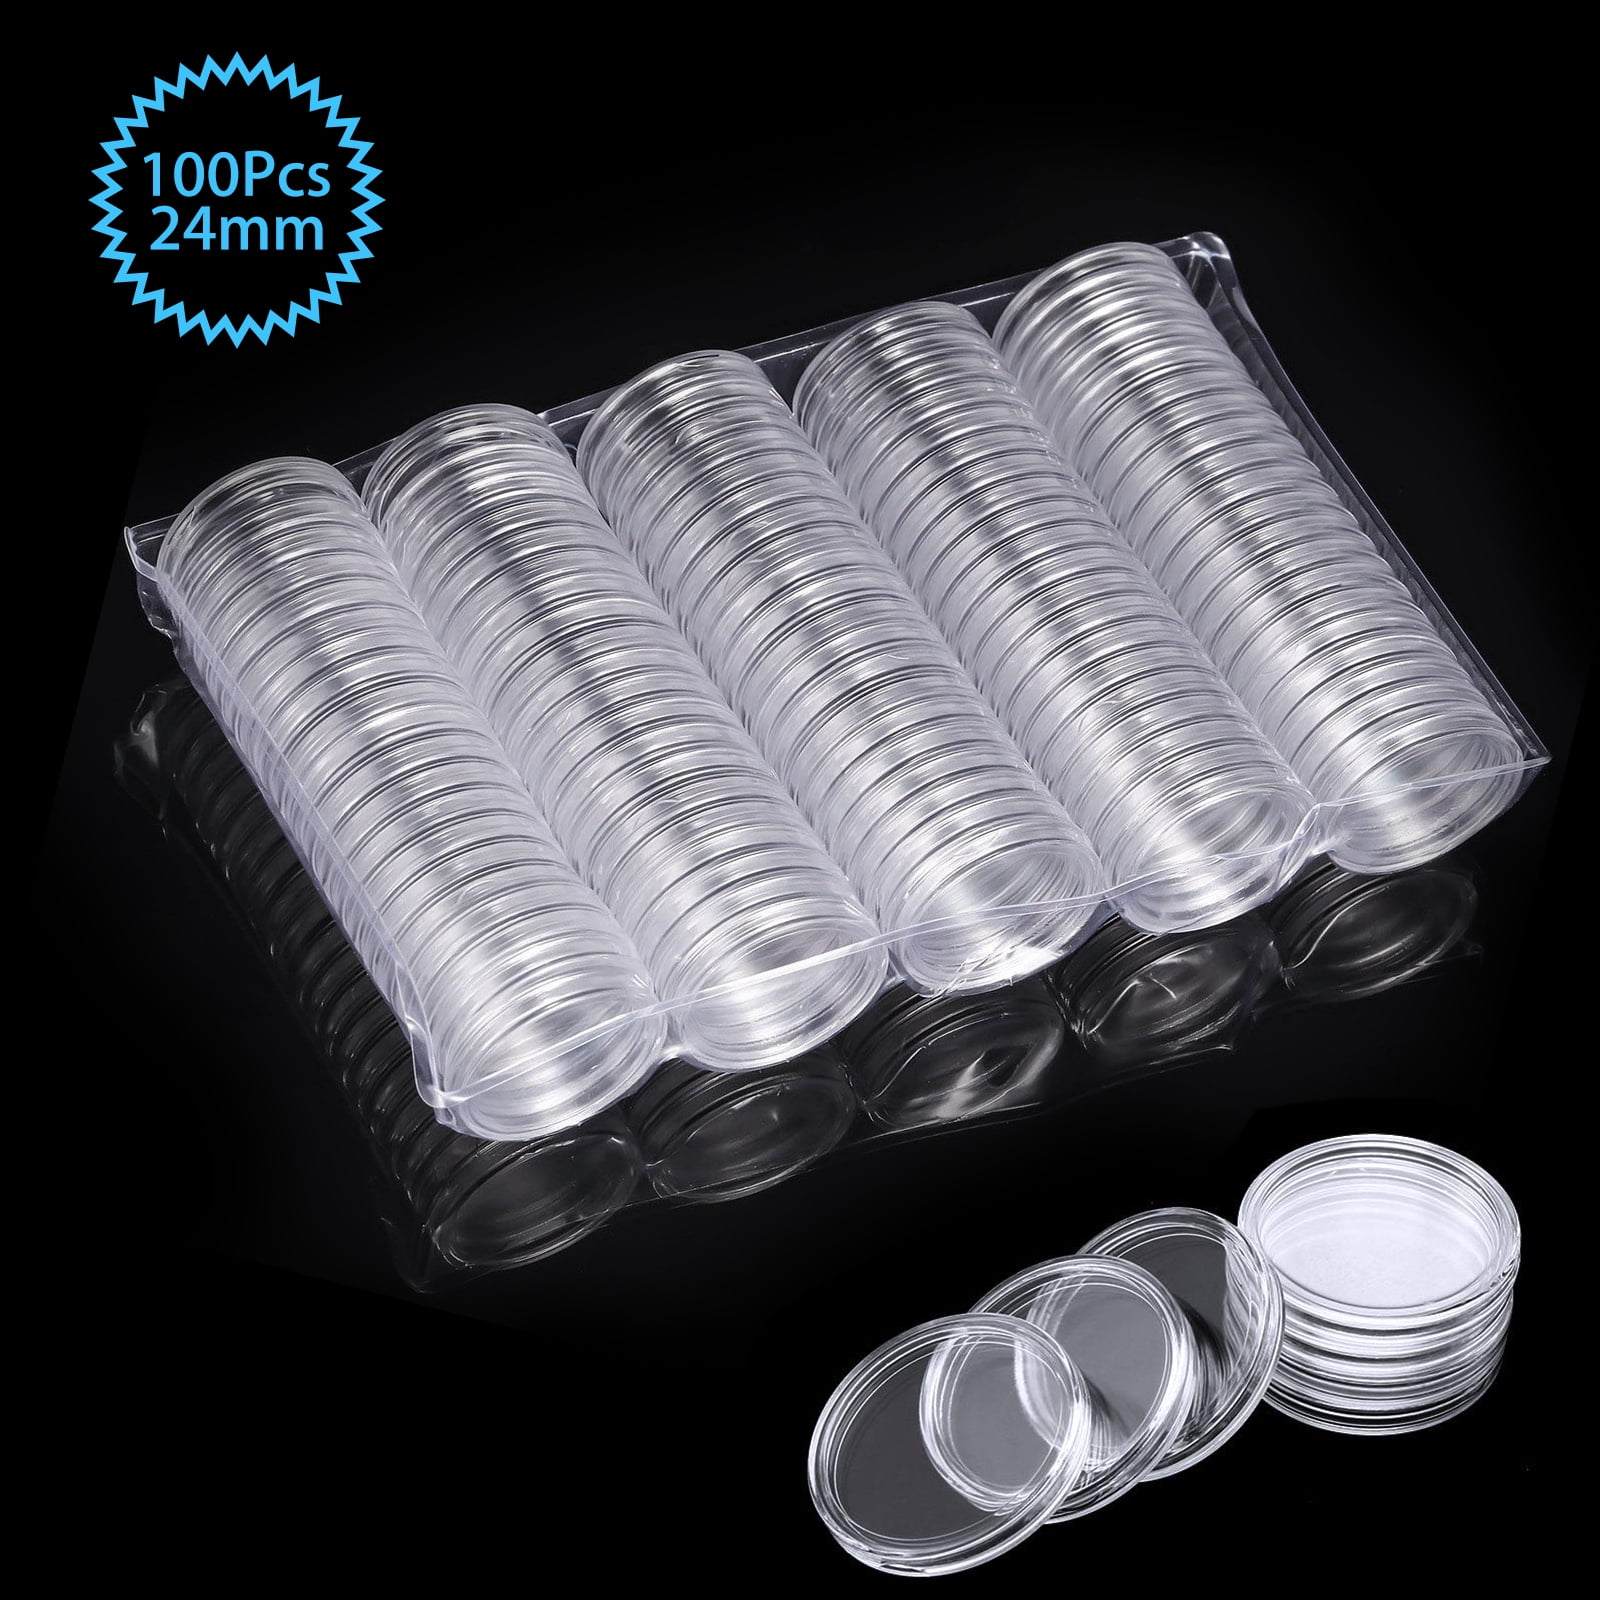 xydstay 100pcs Coin Capsules Coin Case/Holder with Storage Organizer Box for Coin Collection 